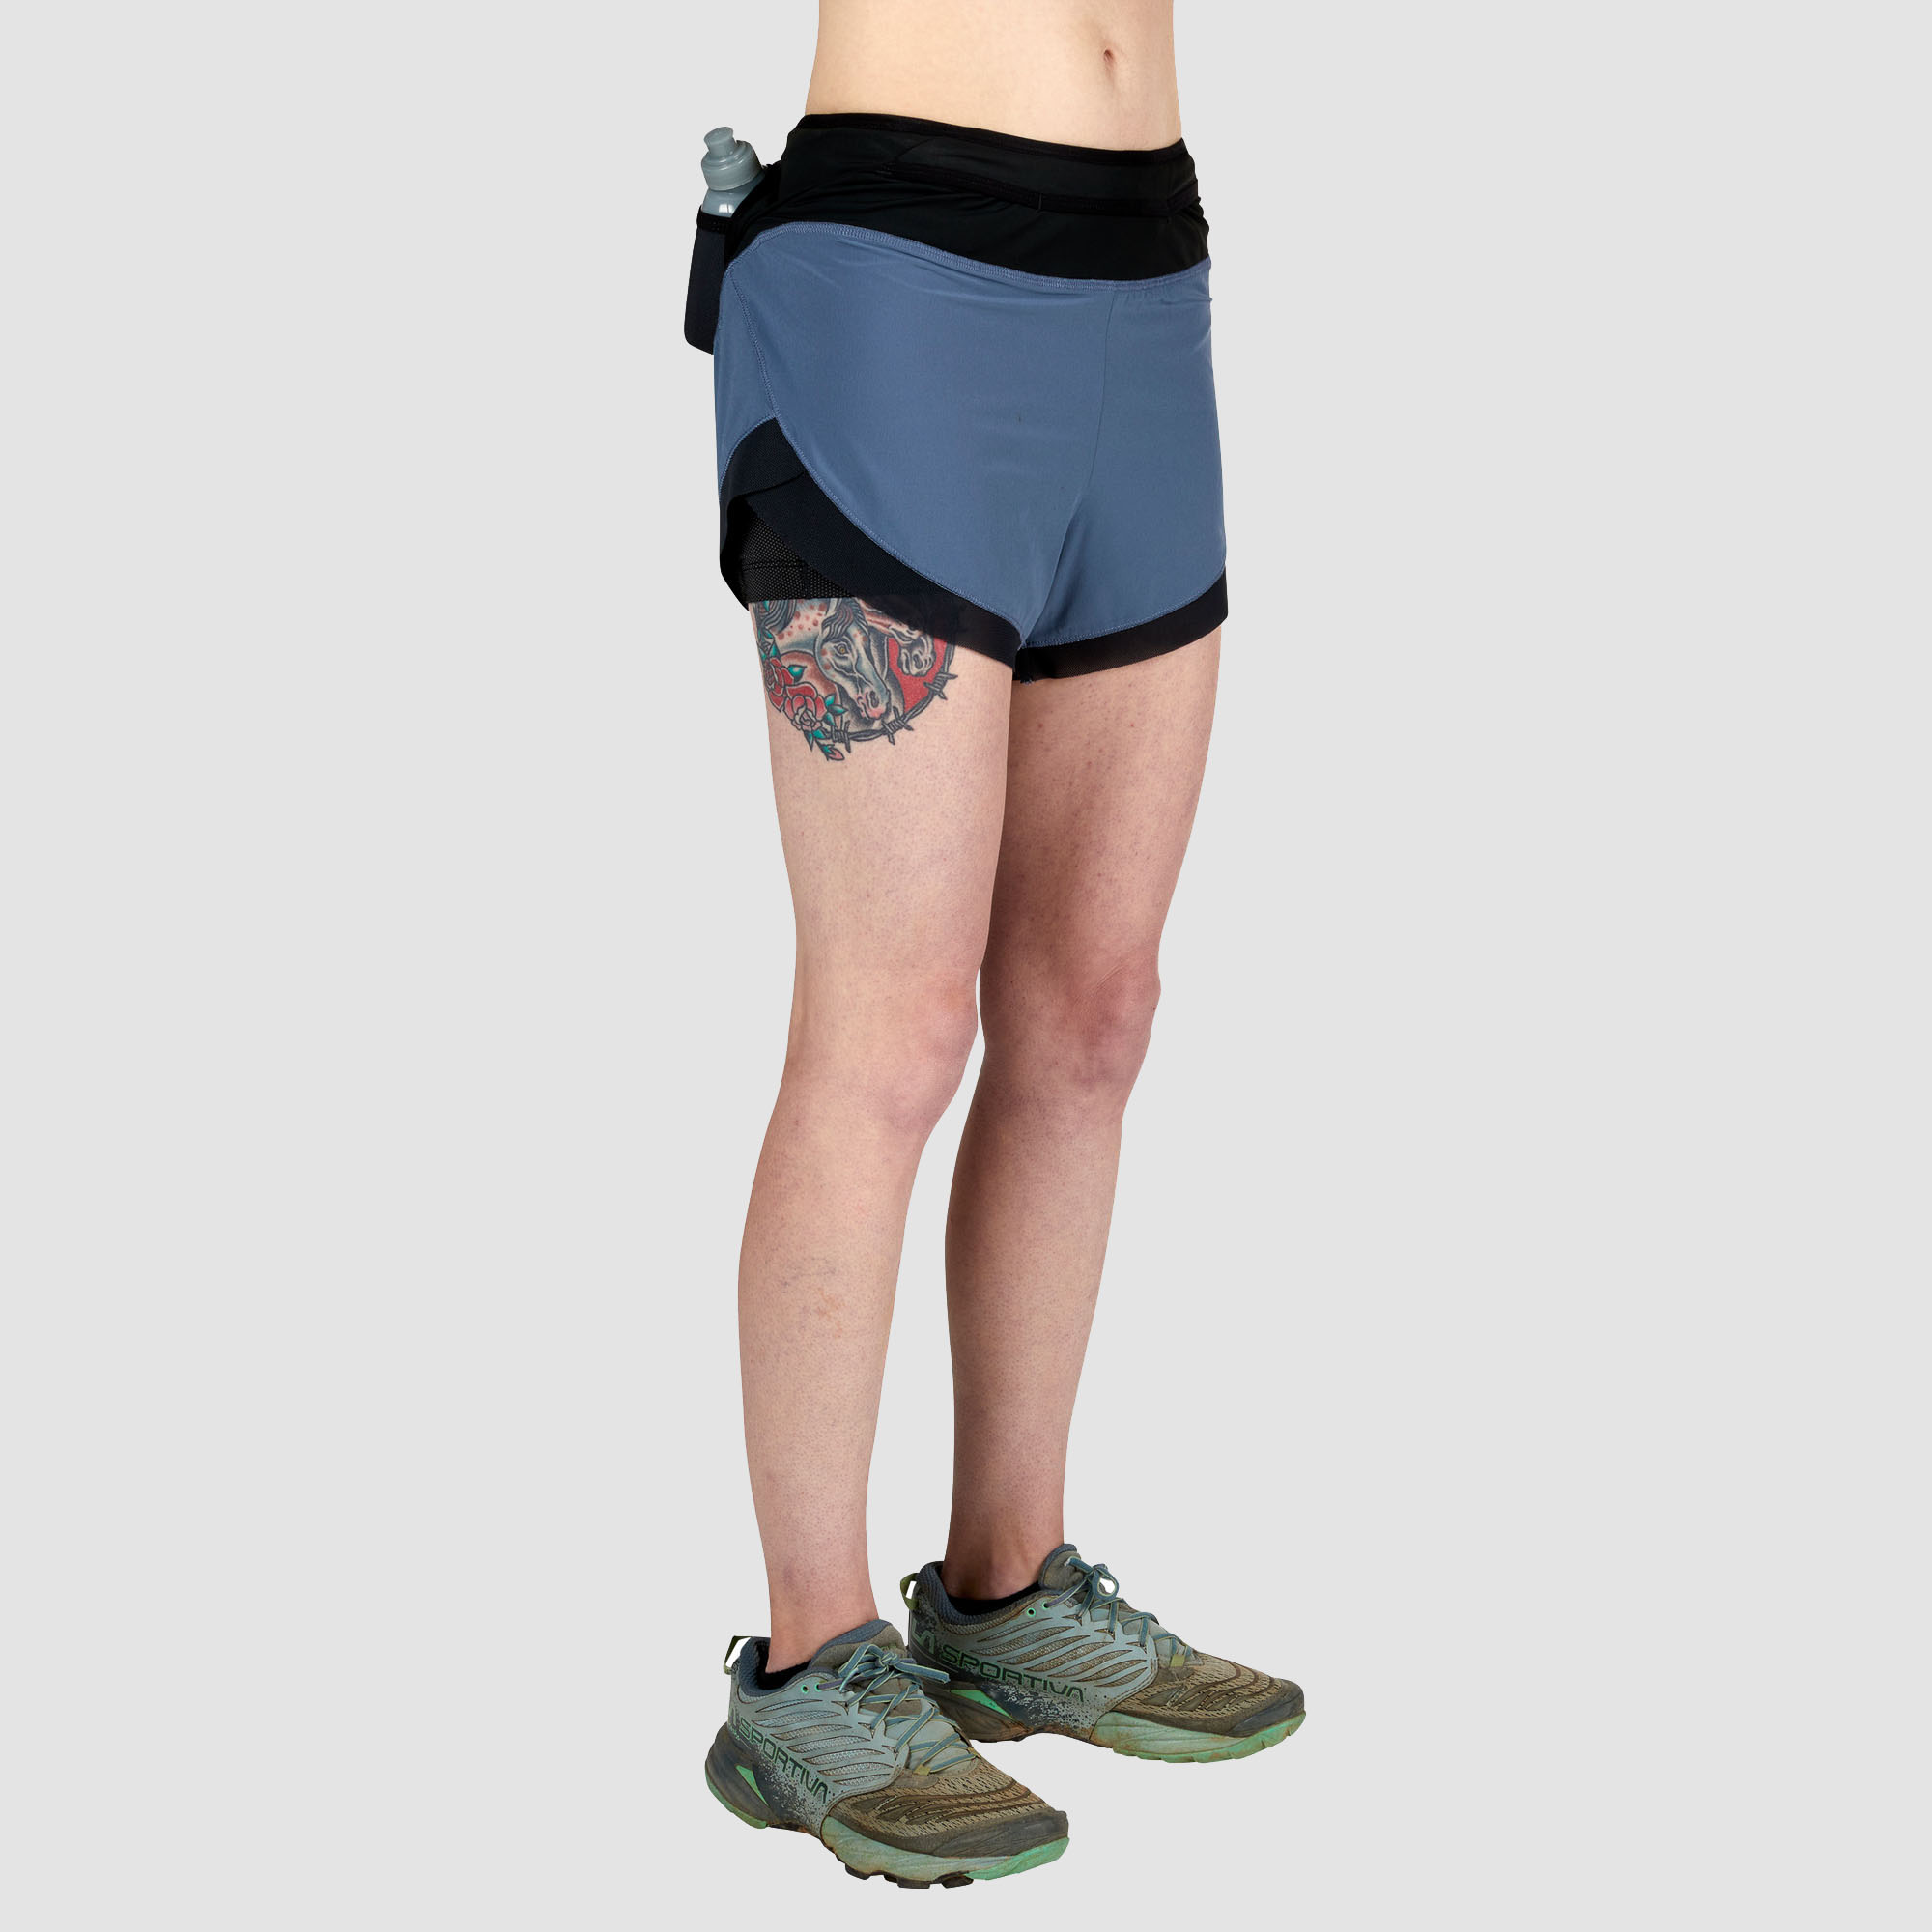 Ultimate Direction Women's Hydro Short - Prior Year Waistbelt Size XL